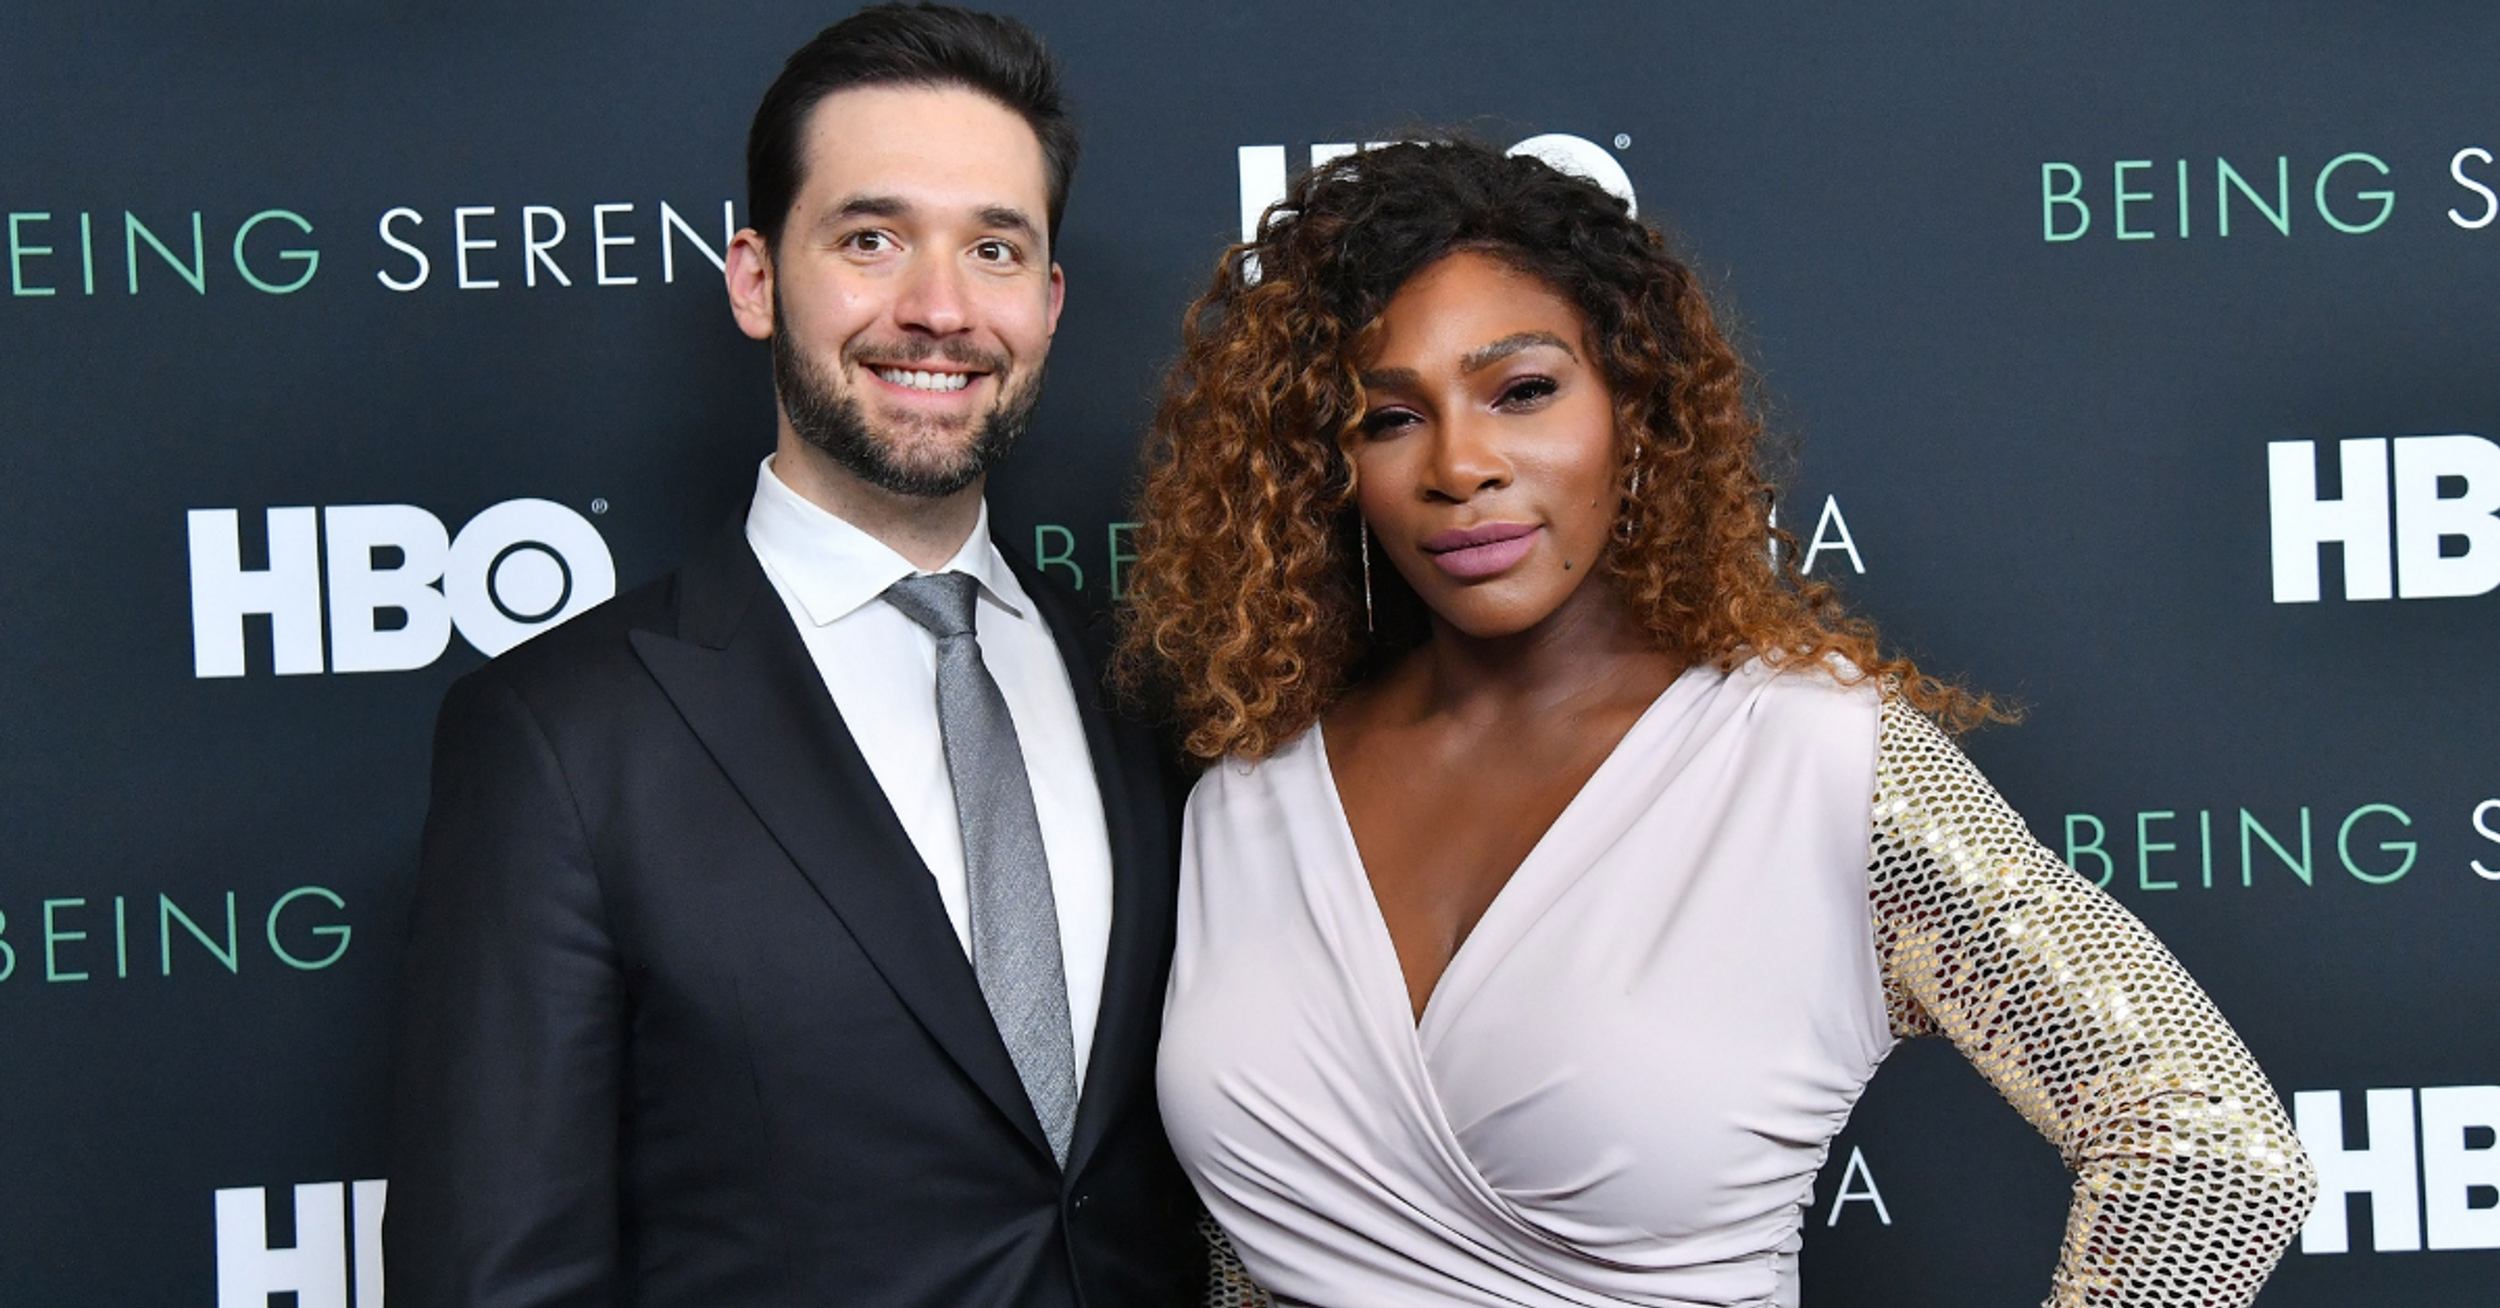 Serena Williams' Husband Shuts Down Her Haters With Iconic T-Shirt At The Australian Open